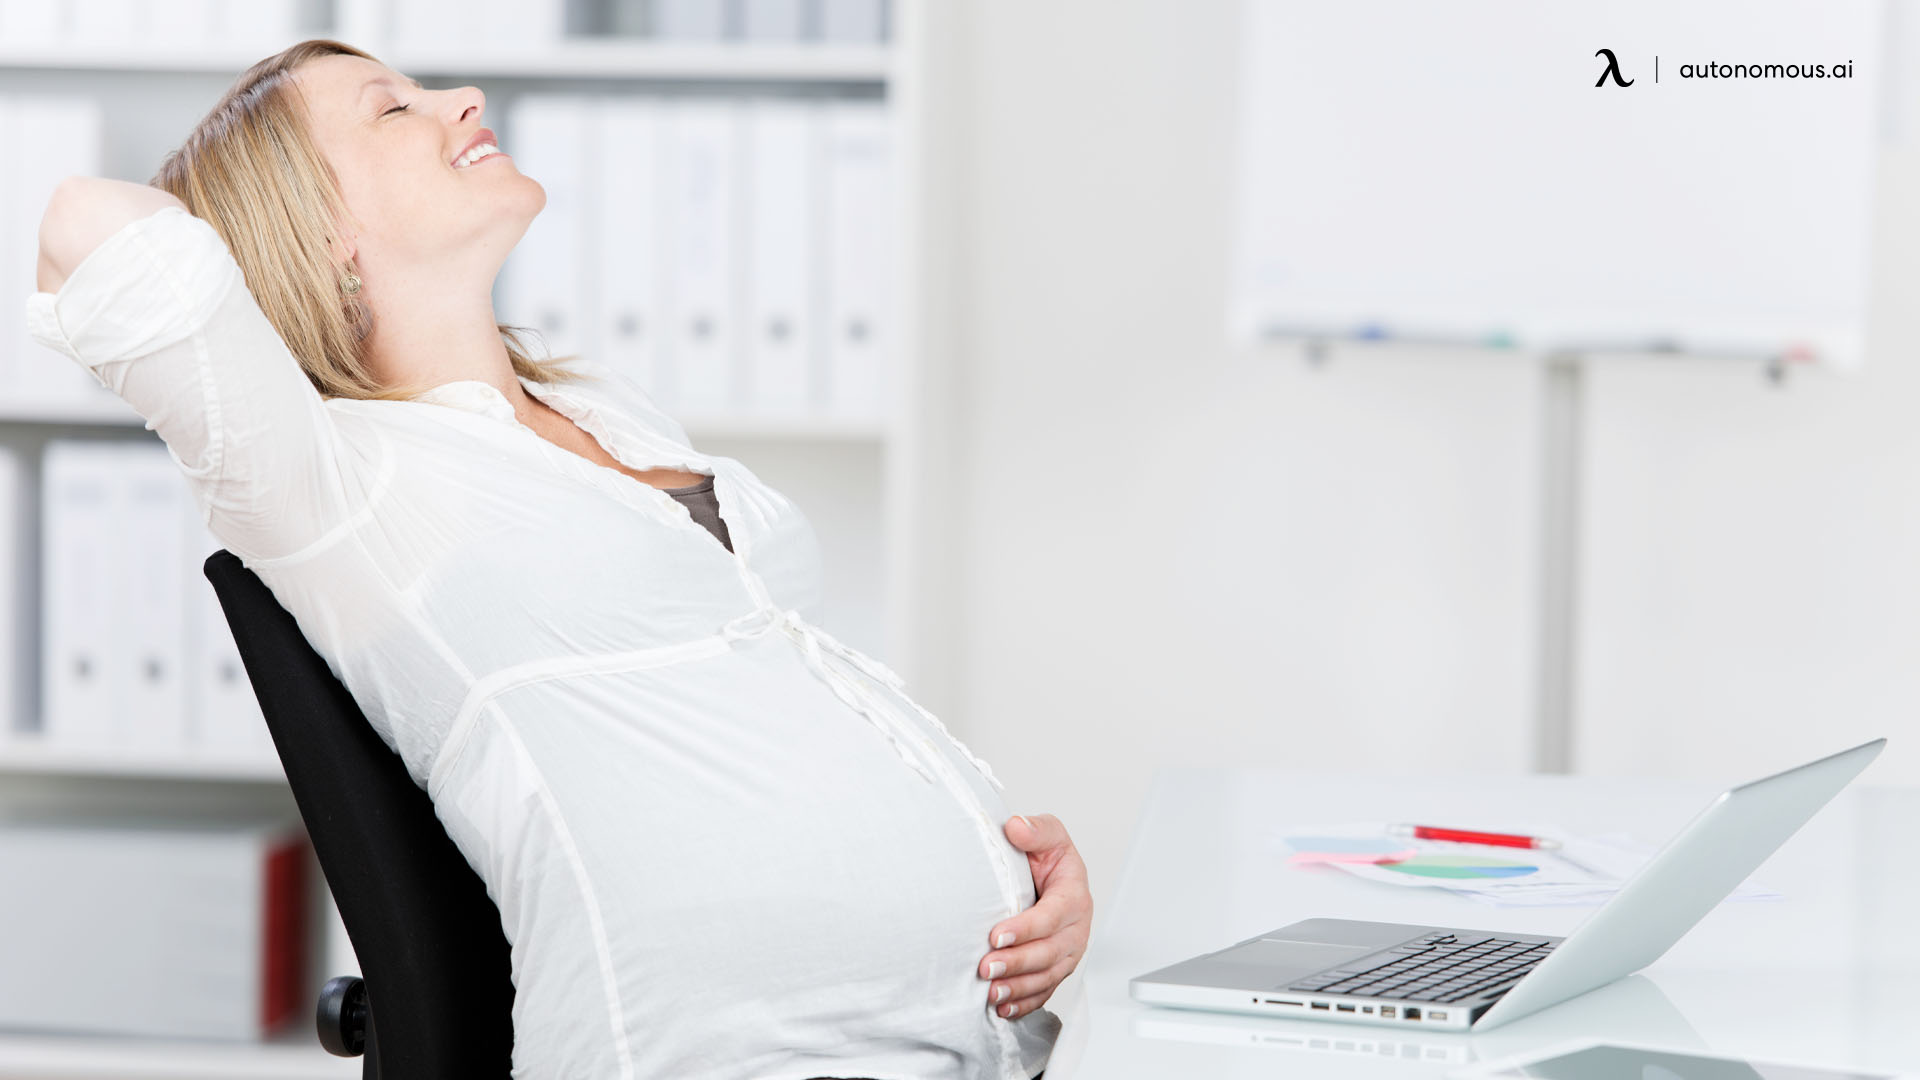 What Is the Thing That You Have to Consider When Choosing the Best Office Chair for A Pregnant Woman?